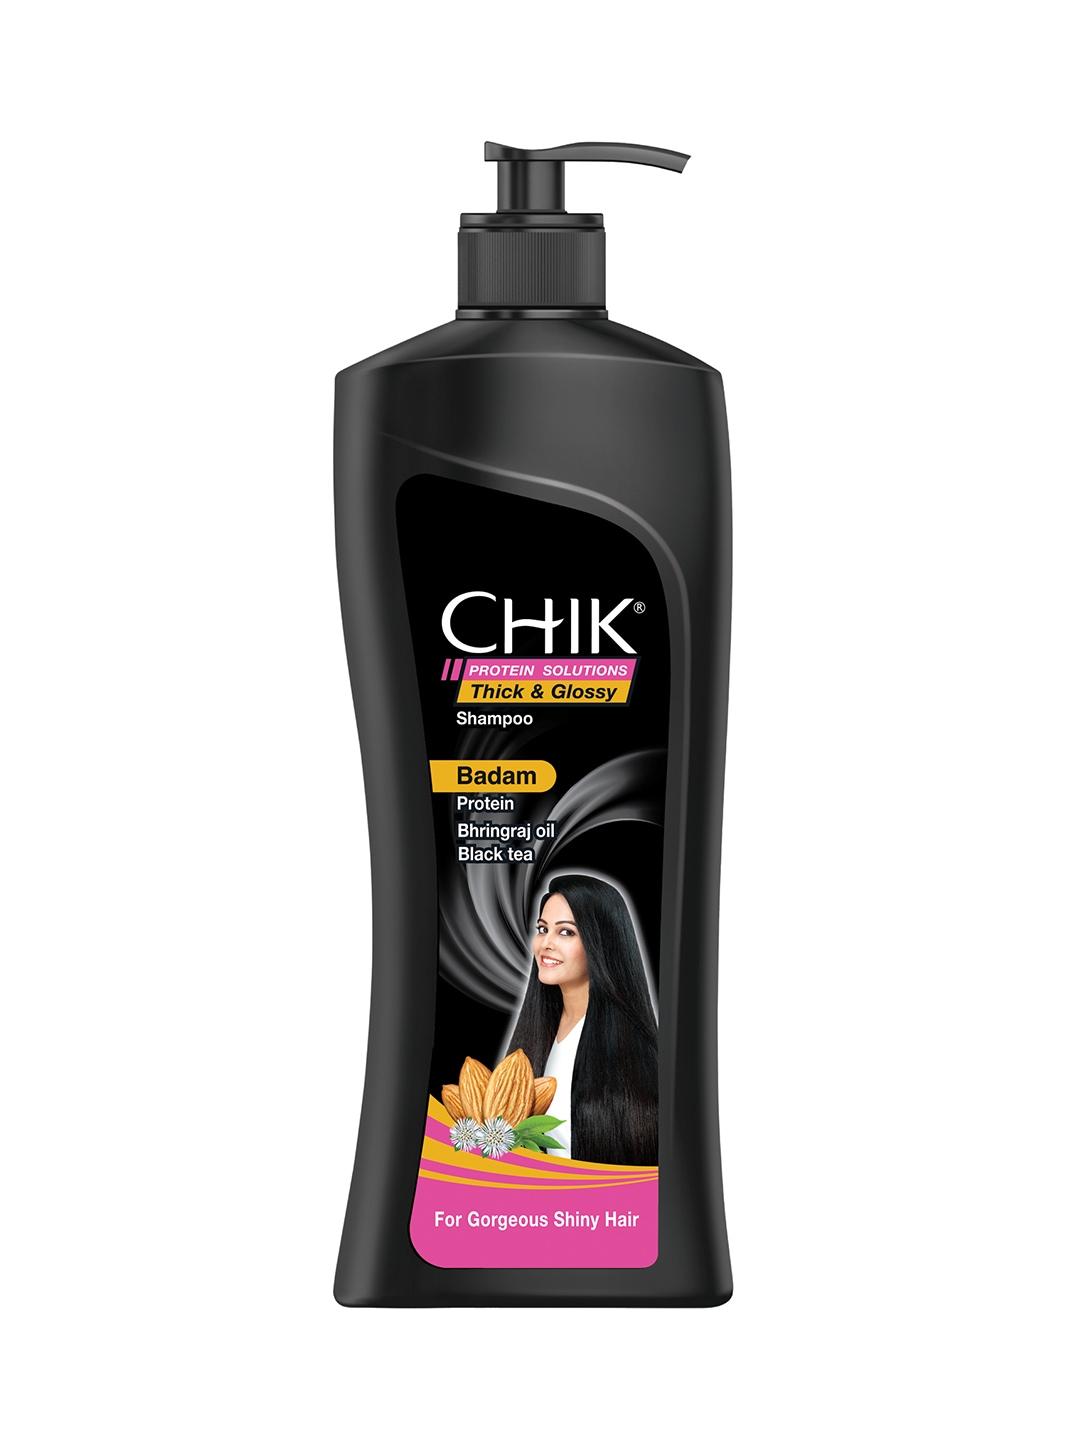 CHIK PROTEIN SOLUTIONS Protein Solution Thick & Glossy Shampoo with Badam - 650 ml